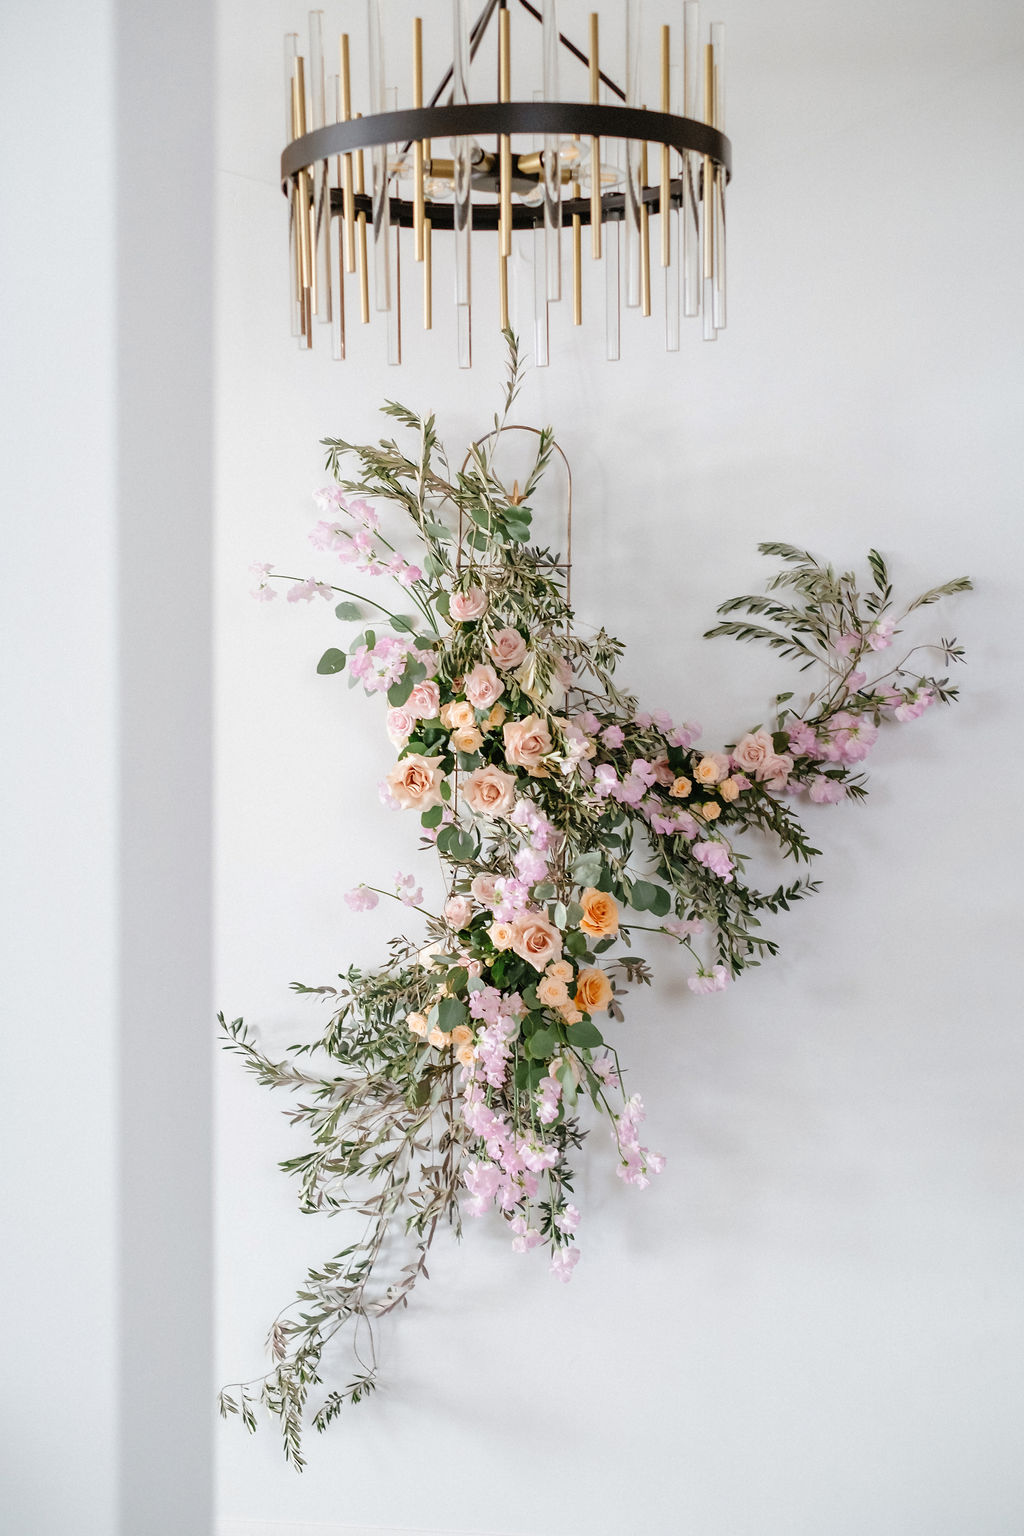 Contemporary floral design by Creative Edge Flowers featuring pink, orange and lilac blooms